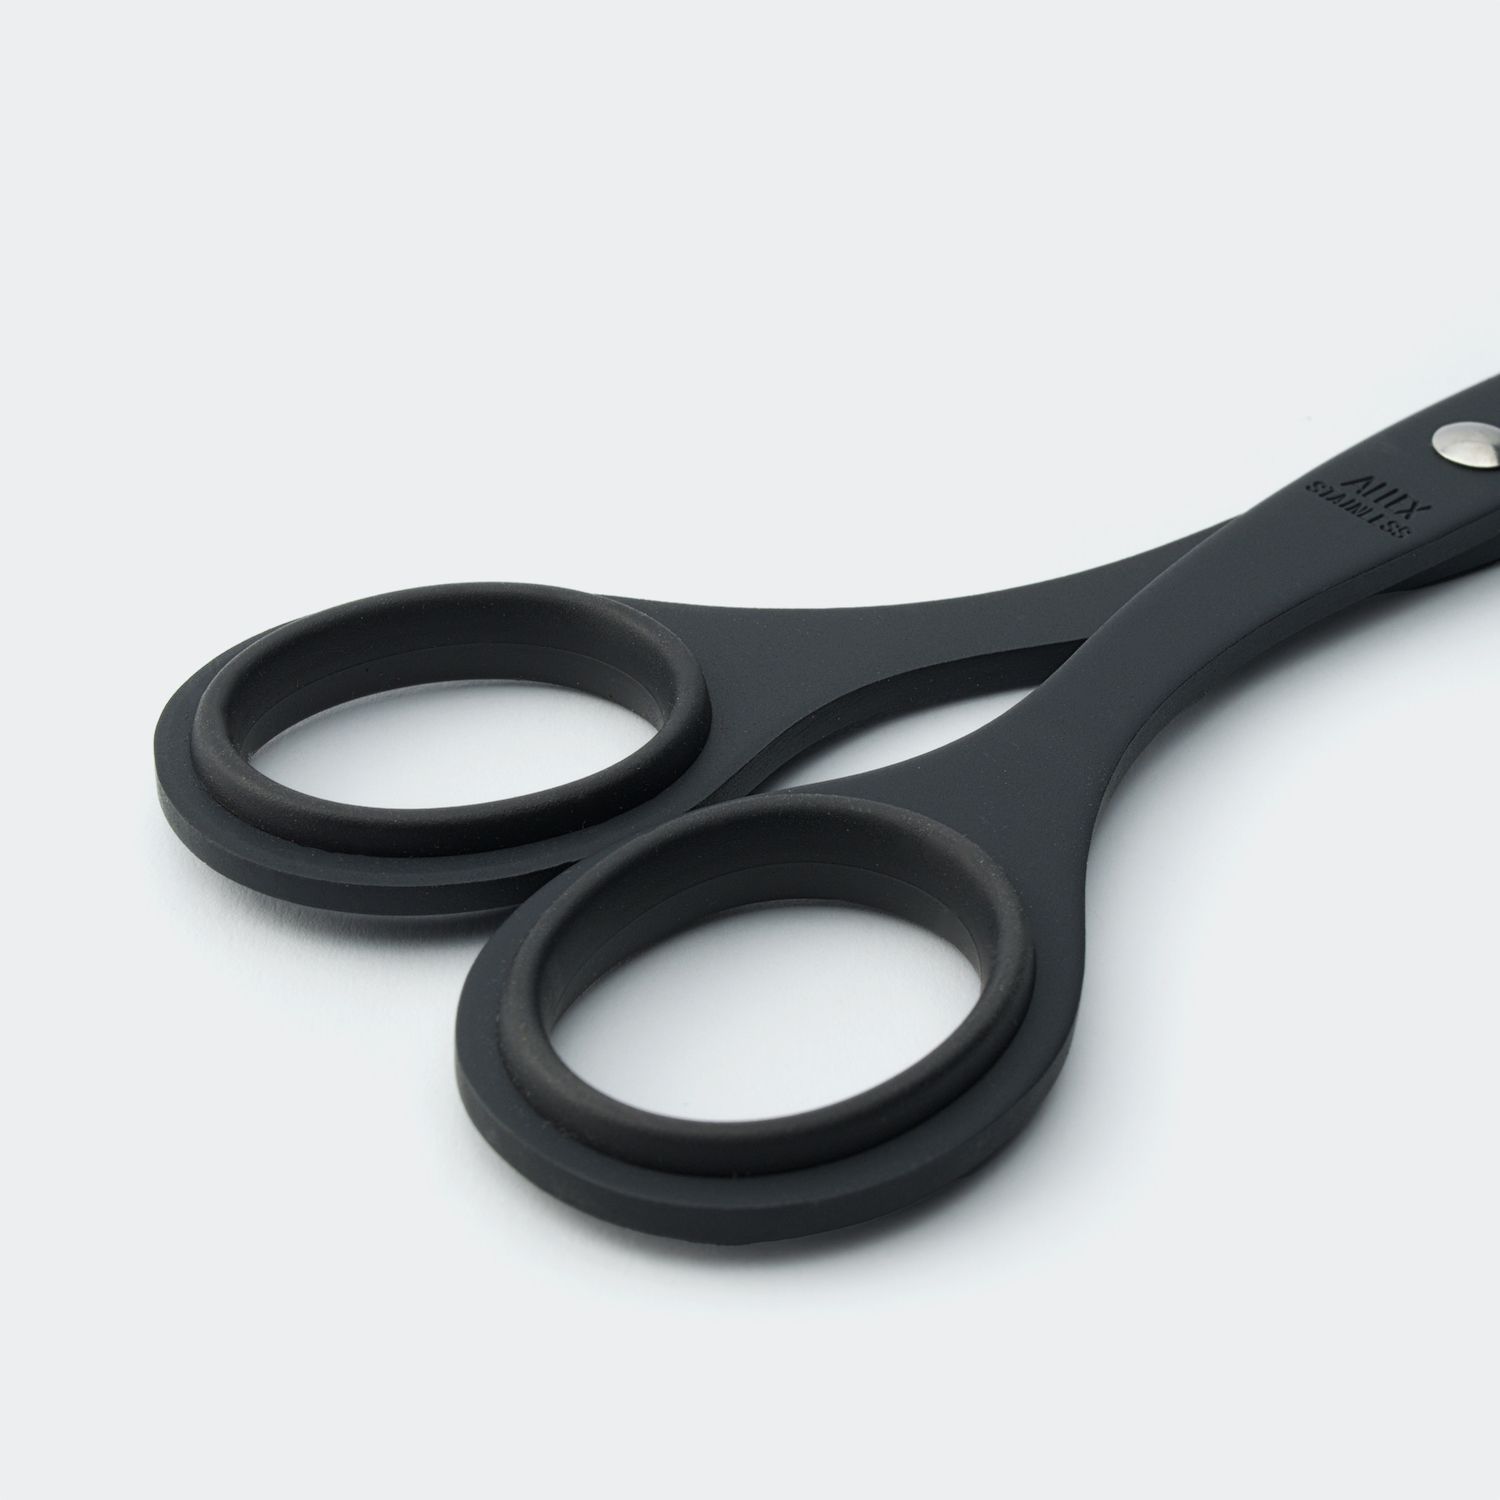 ALLEX Black and Pink Scissors for Office, Japanese Stainless Steel